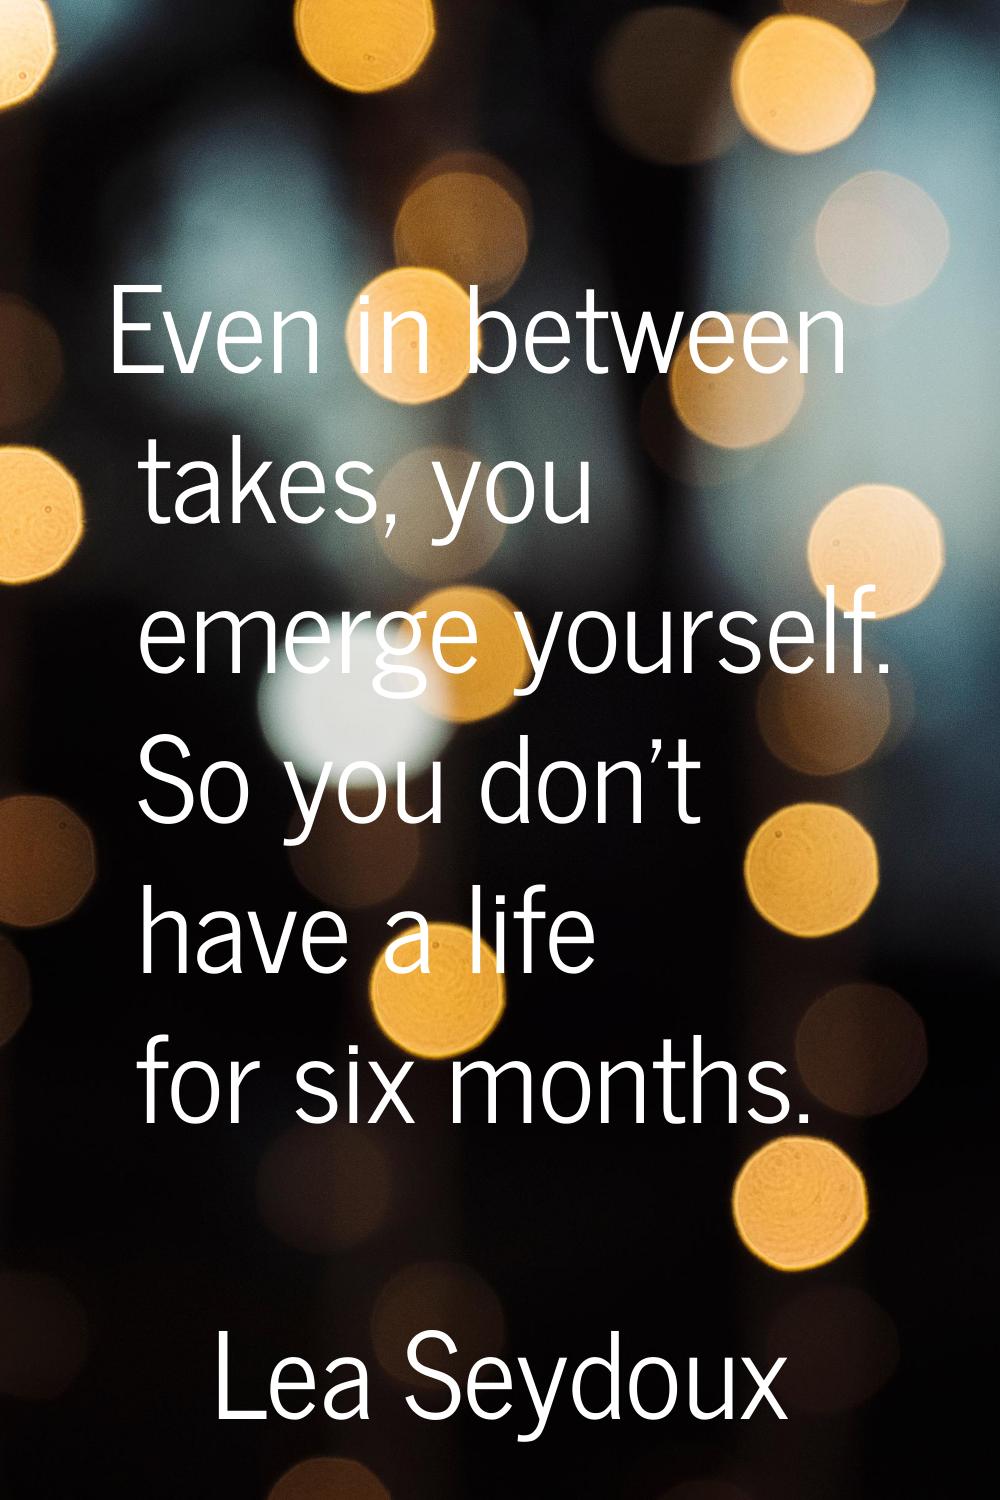 Even in between takes, you emerge yourself. So you don't have a life for six months.